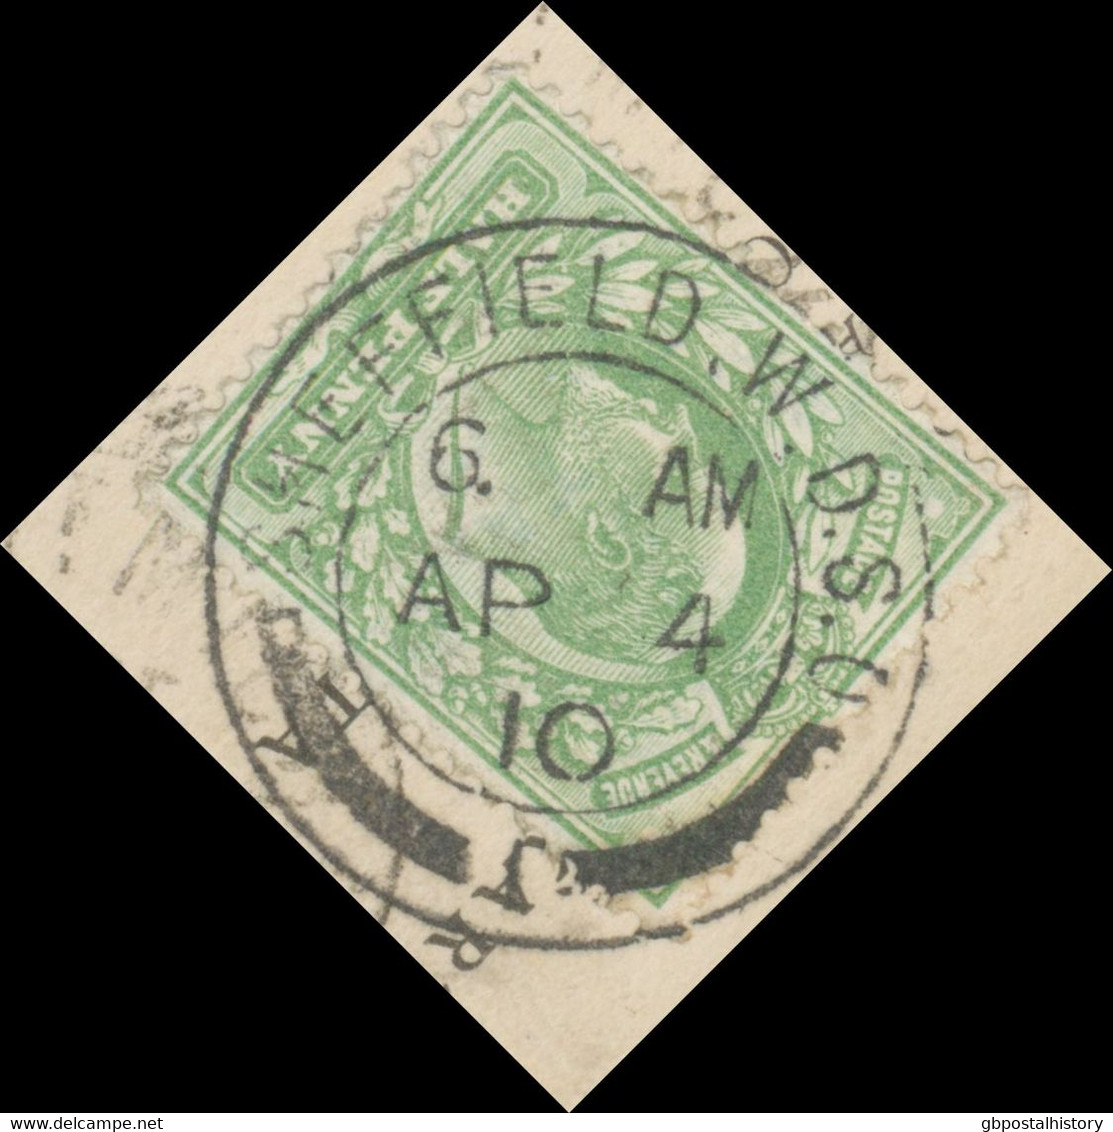 GB 1910 French Pc W 10C From Mont St. Michel REDIRECTED In SHEFFIELD, YORKSHIRE - Lettres & Documents